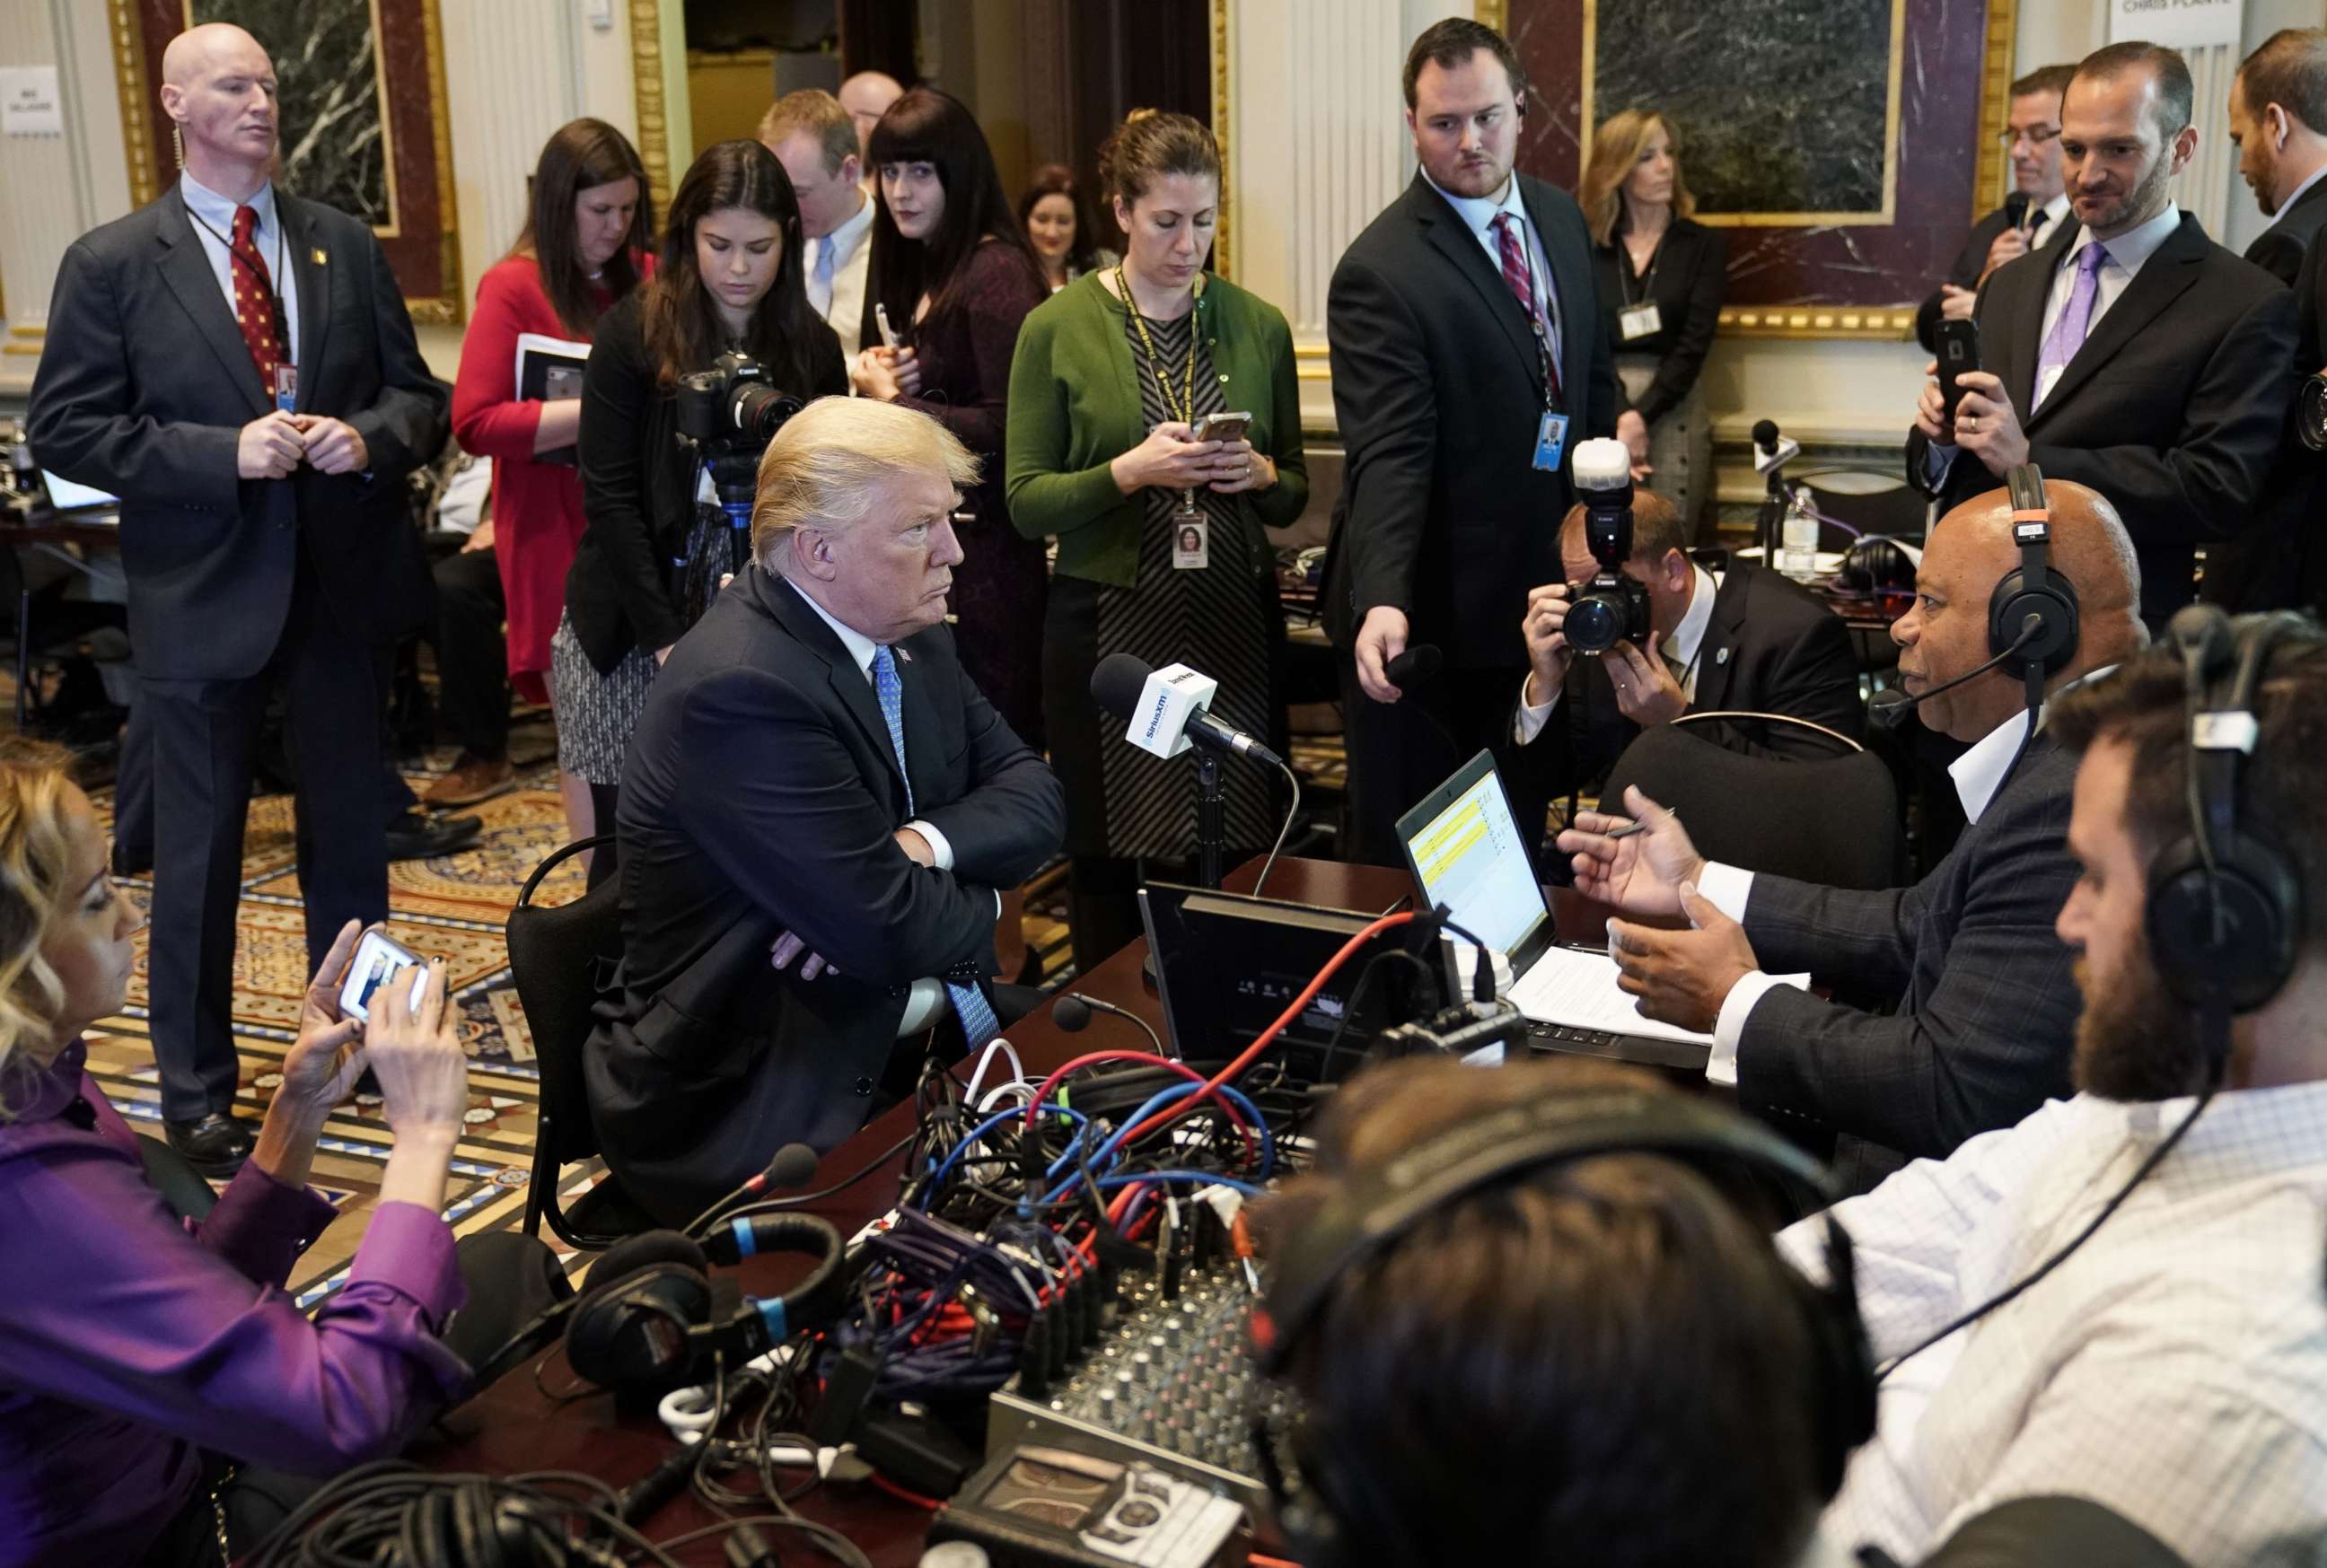 PHOTO: President Donald Trump looks at a reporter as he takes part in a series of radio interviews in the Eisenhower Executive Office Building, next to the White House, on Oct. 17, 2017 in Washington.